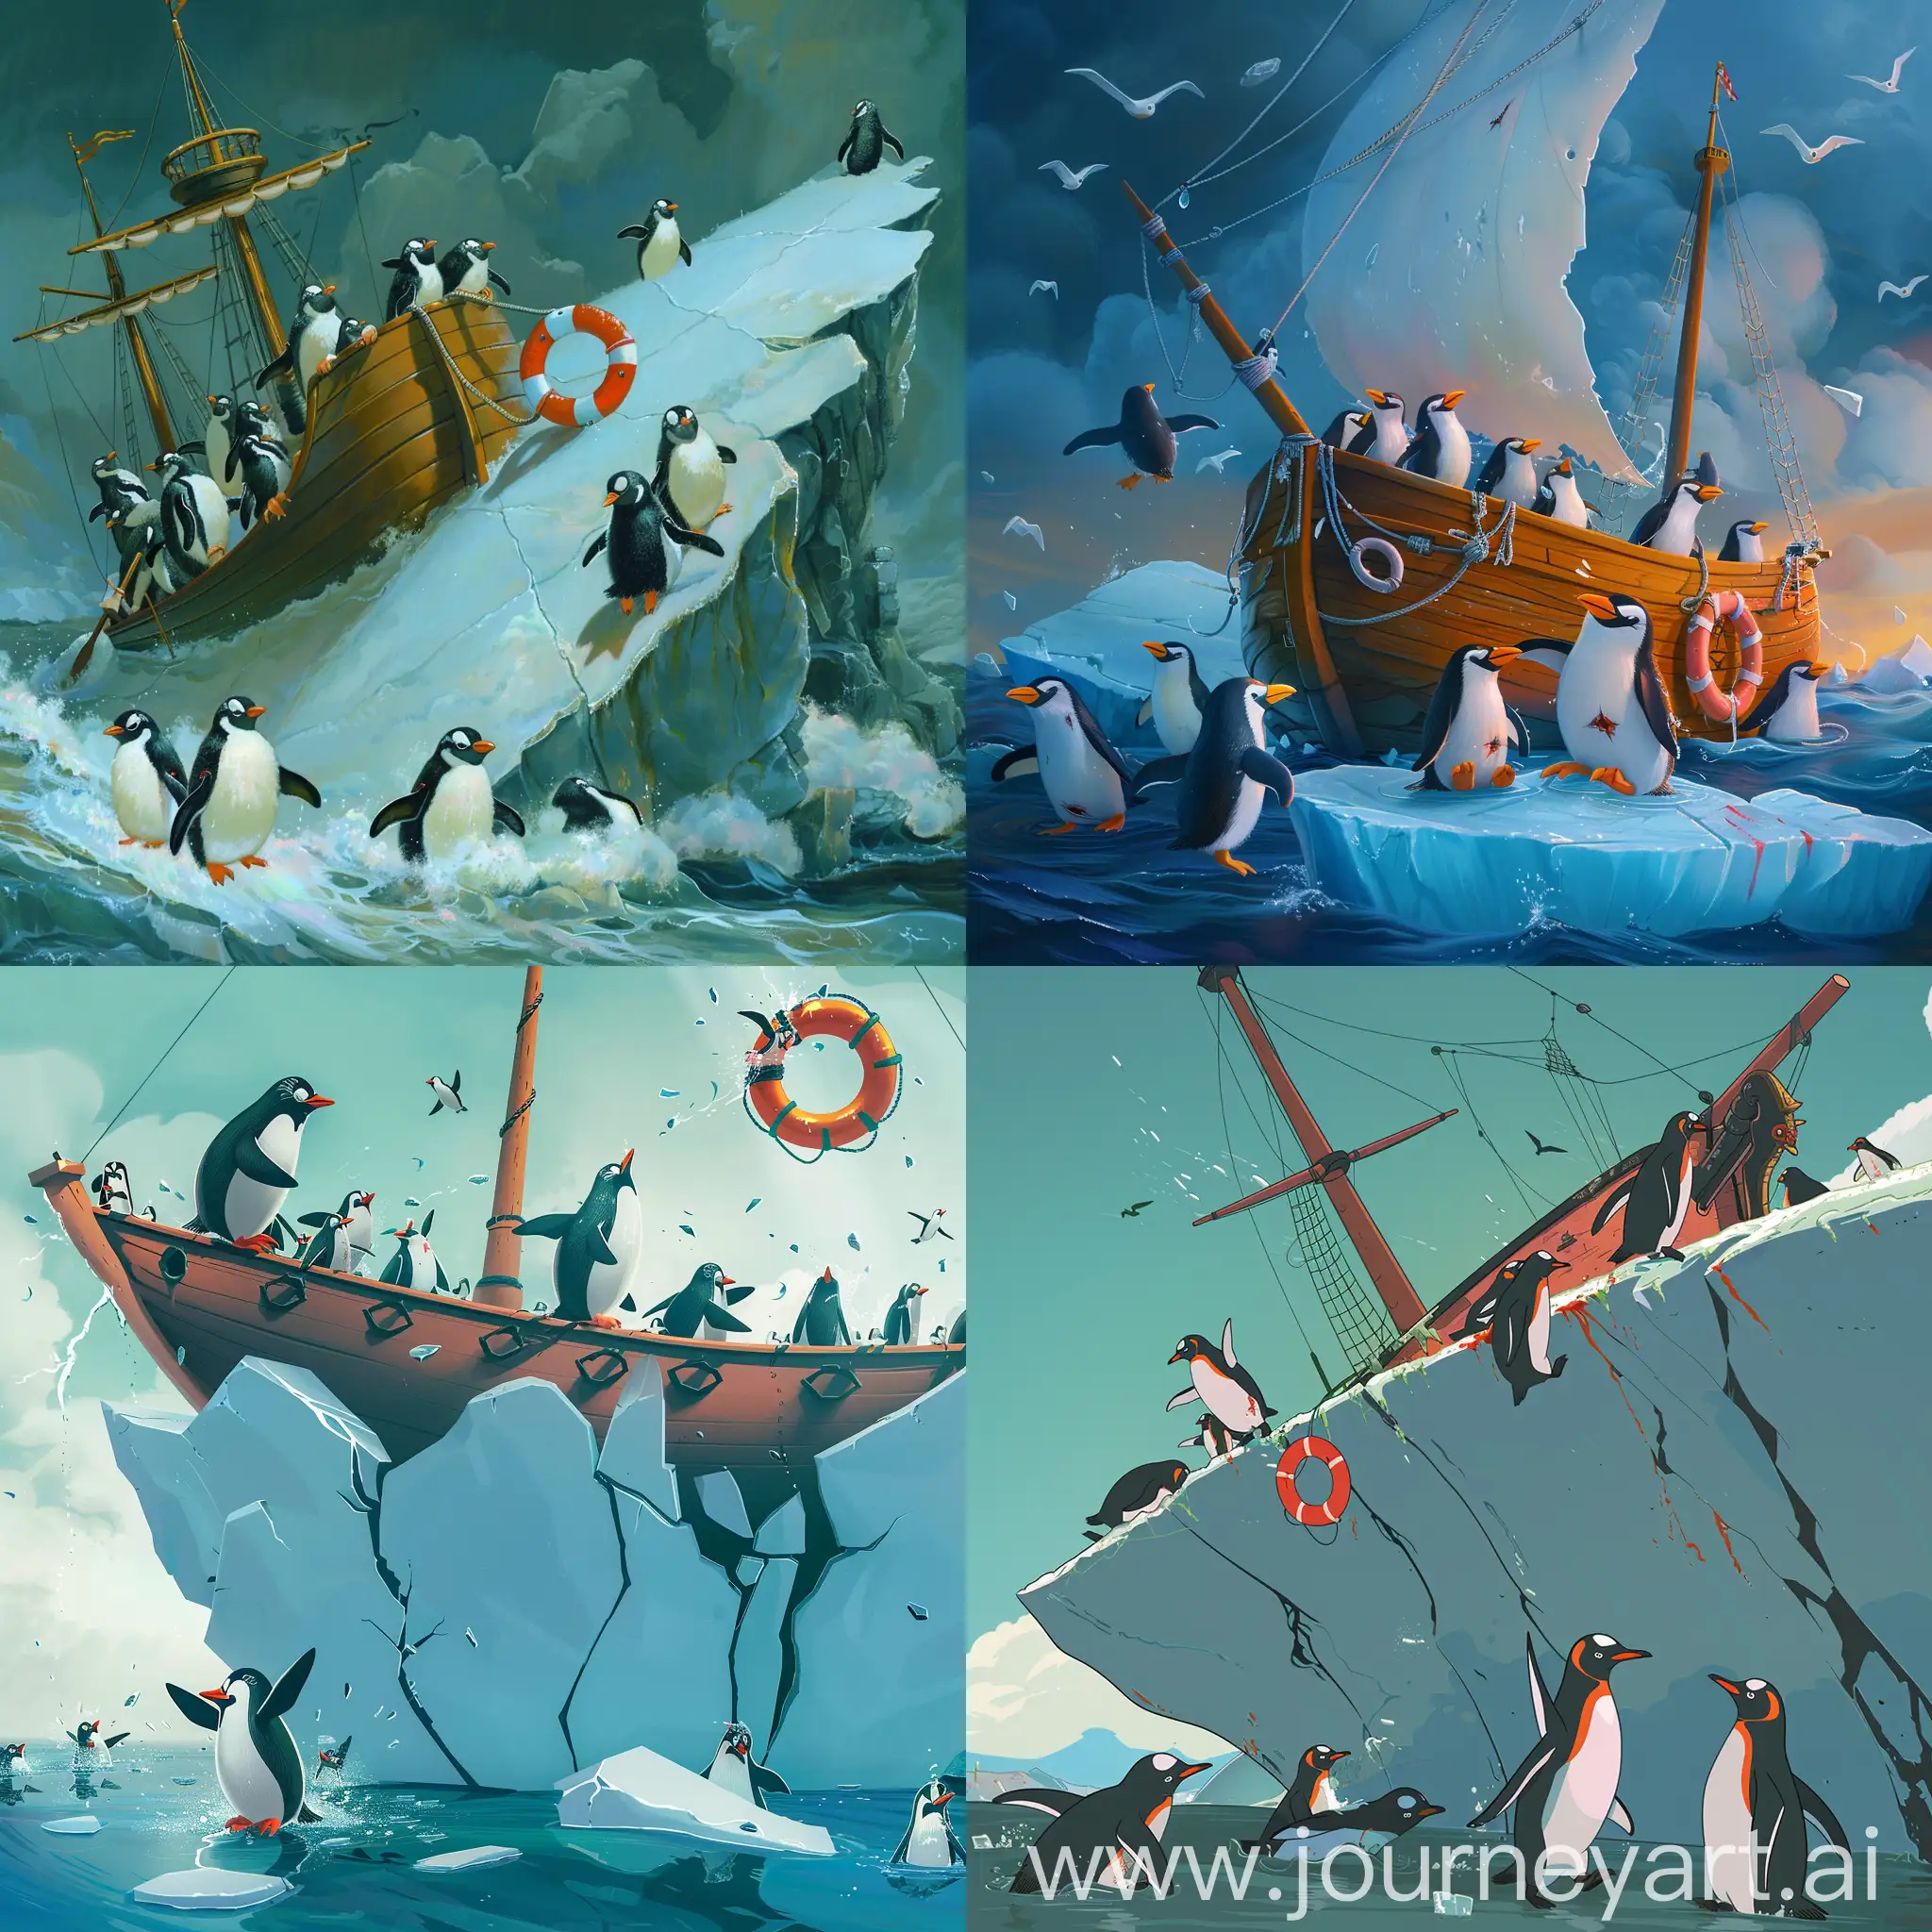 It all takes place in a cartoon. A ship with penguins sails along a large sinking ice floe that has cracked and is going down. Captain Penguin throws a life preserver to the penguins, but not all of them decide to save themselves and some of the penguins ignore the life preserver and prefer to die, and some penguins in the life preserver